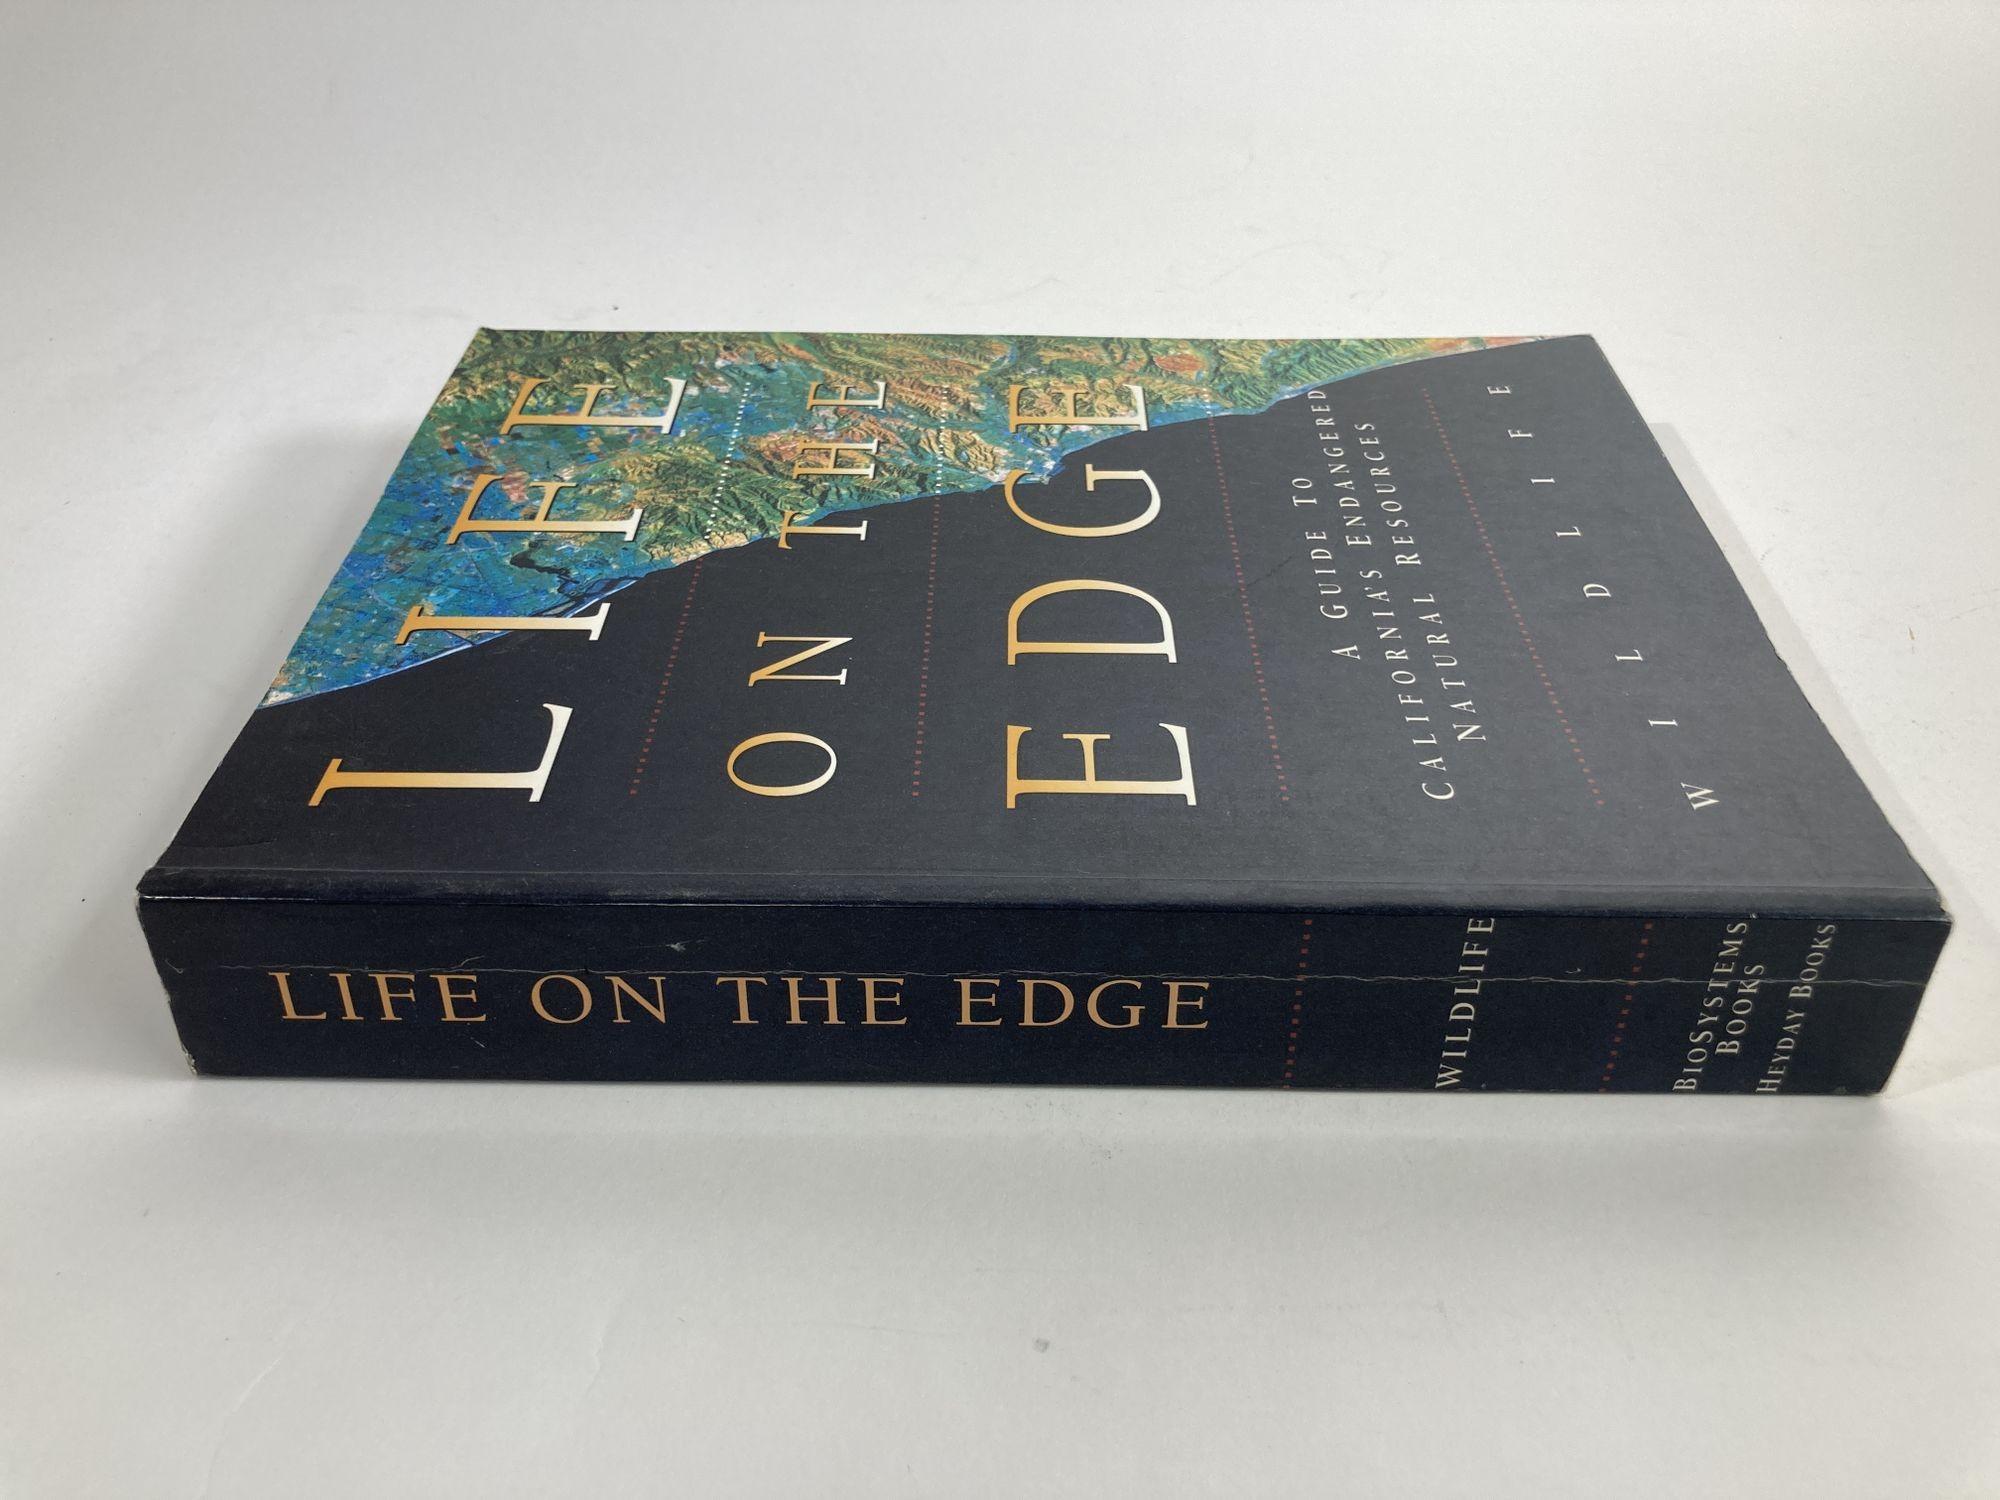 Organic Modern Life on the Edge, A Guide to California's Endangered Natural Resources, Wildlif For Sale